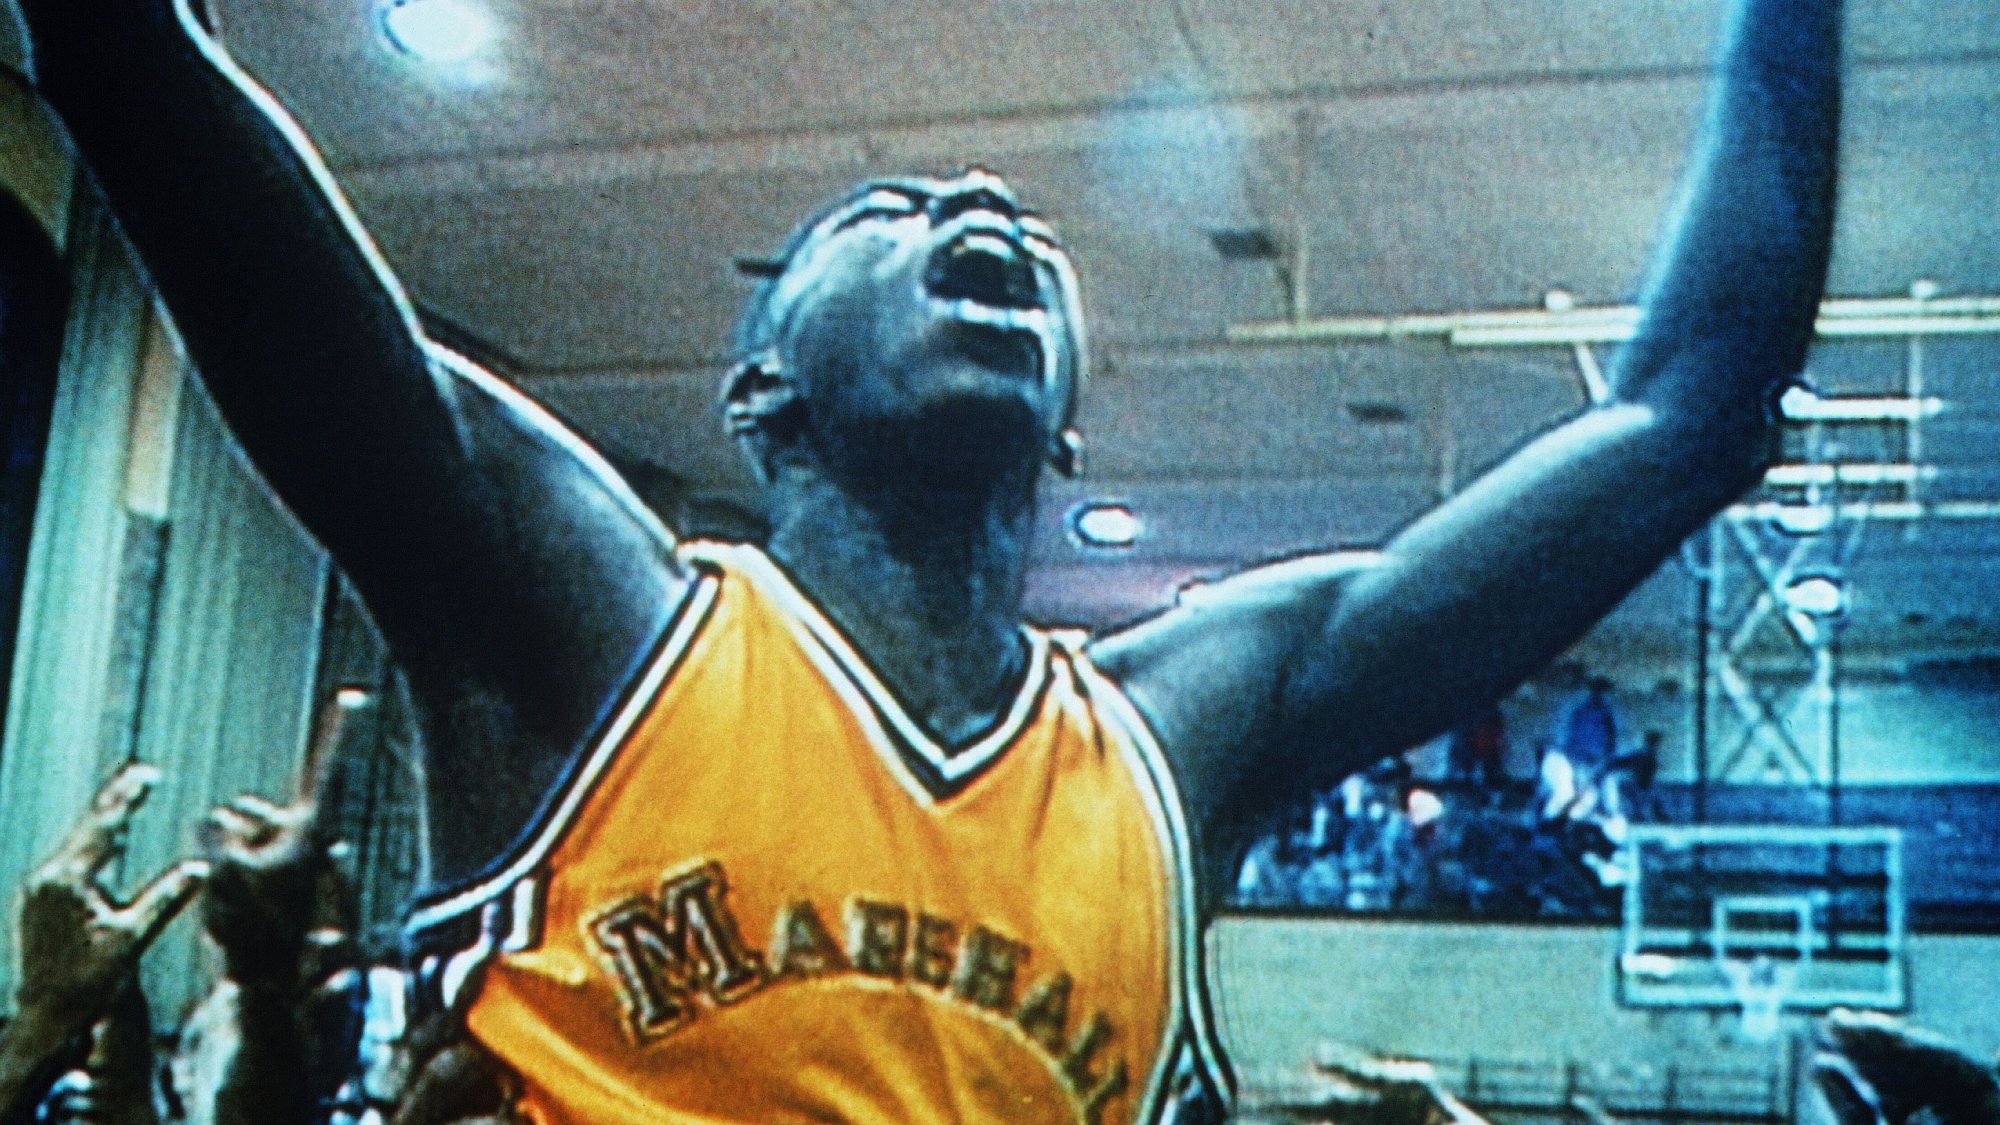 A man in a yellow basketball jersey raises his arms in victory.